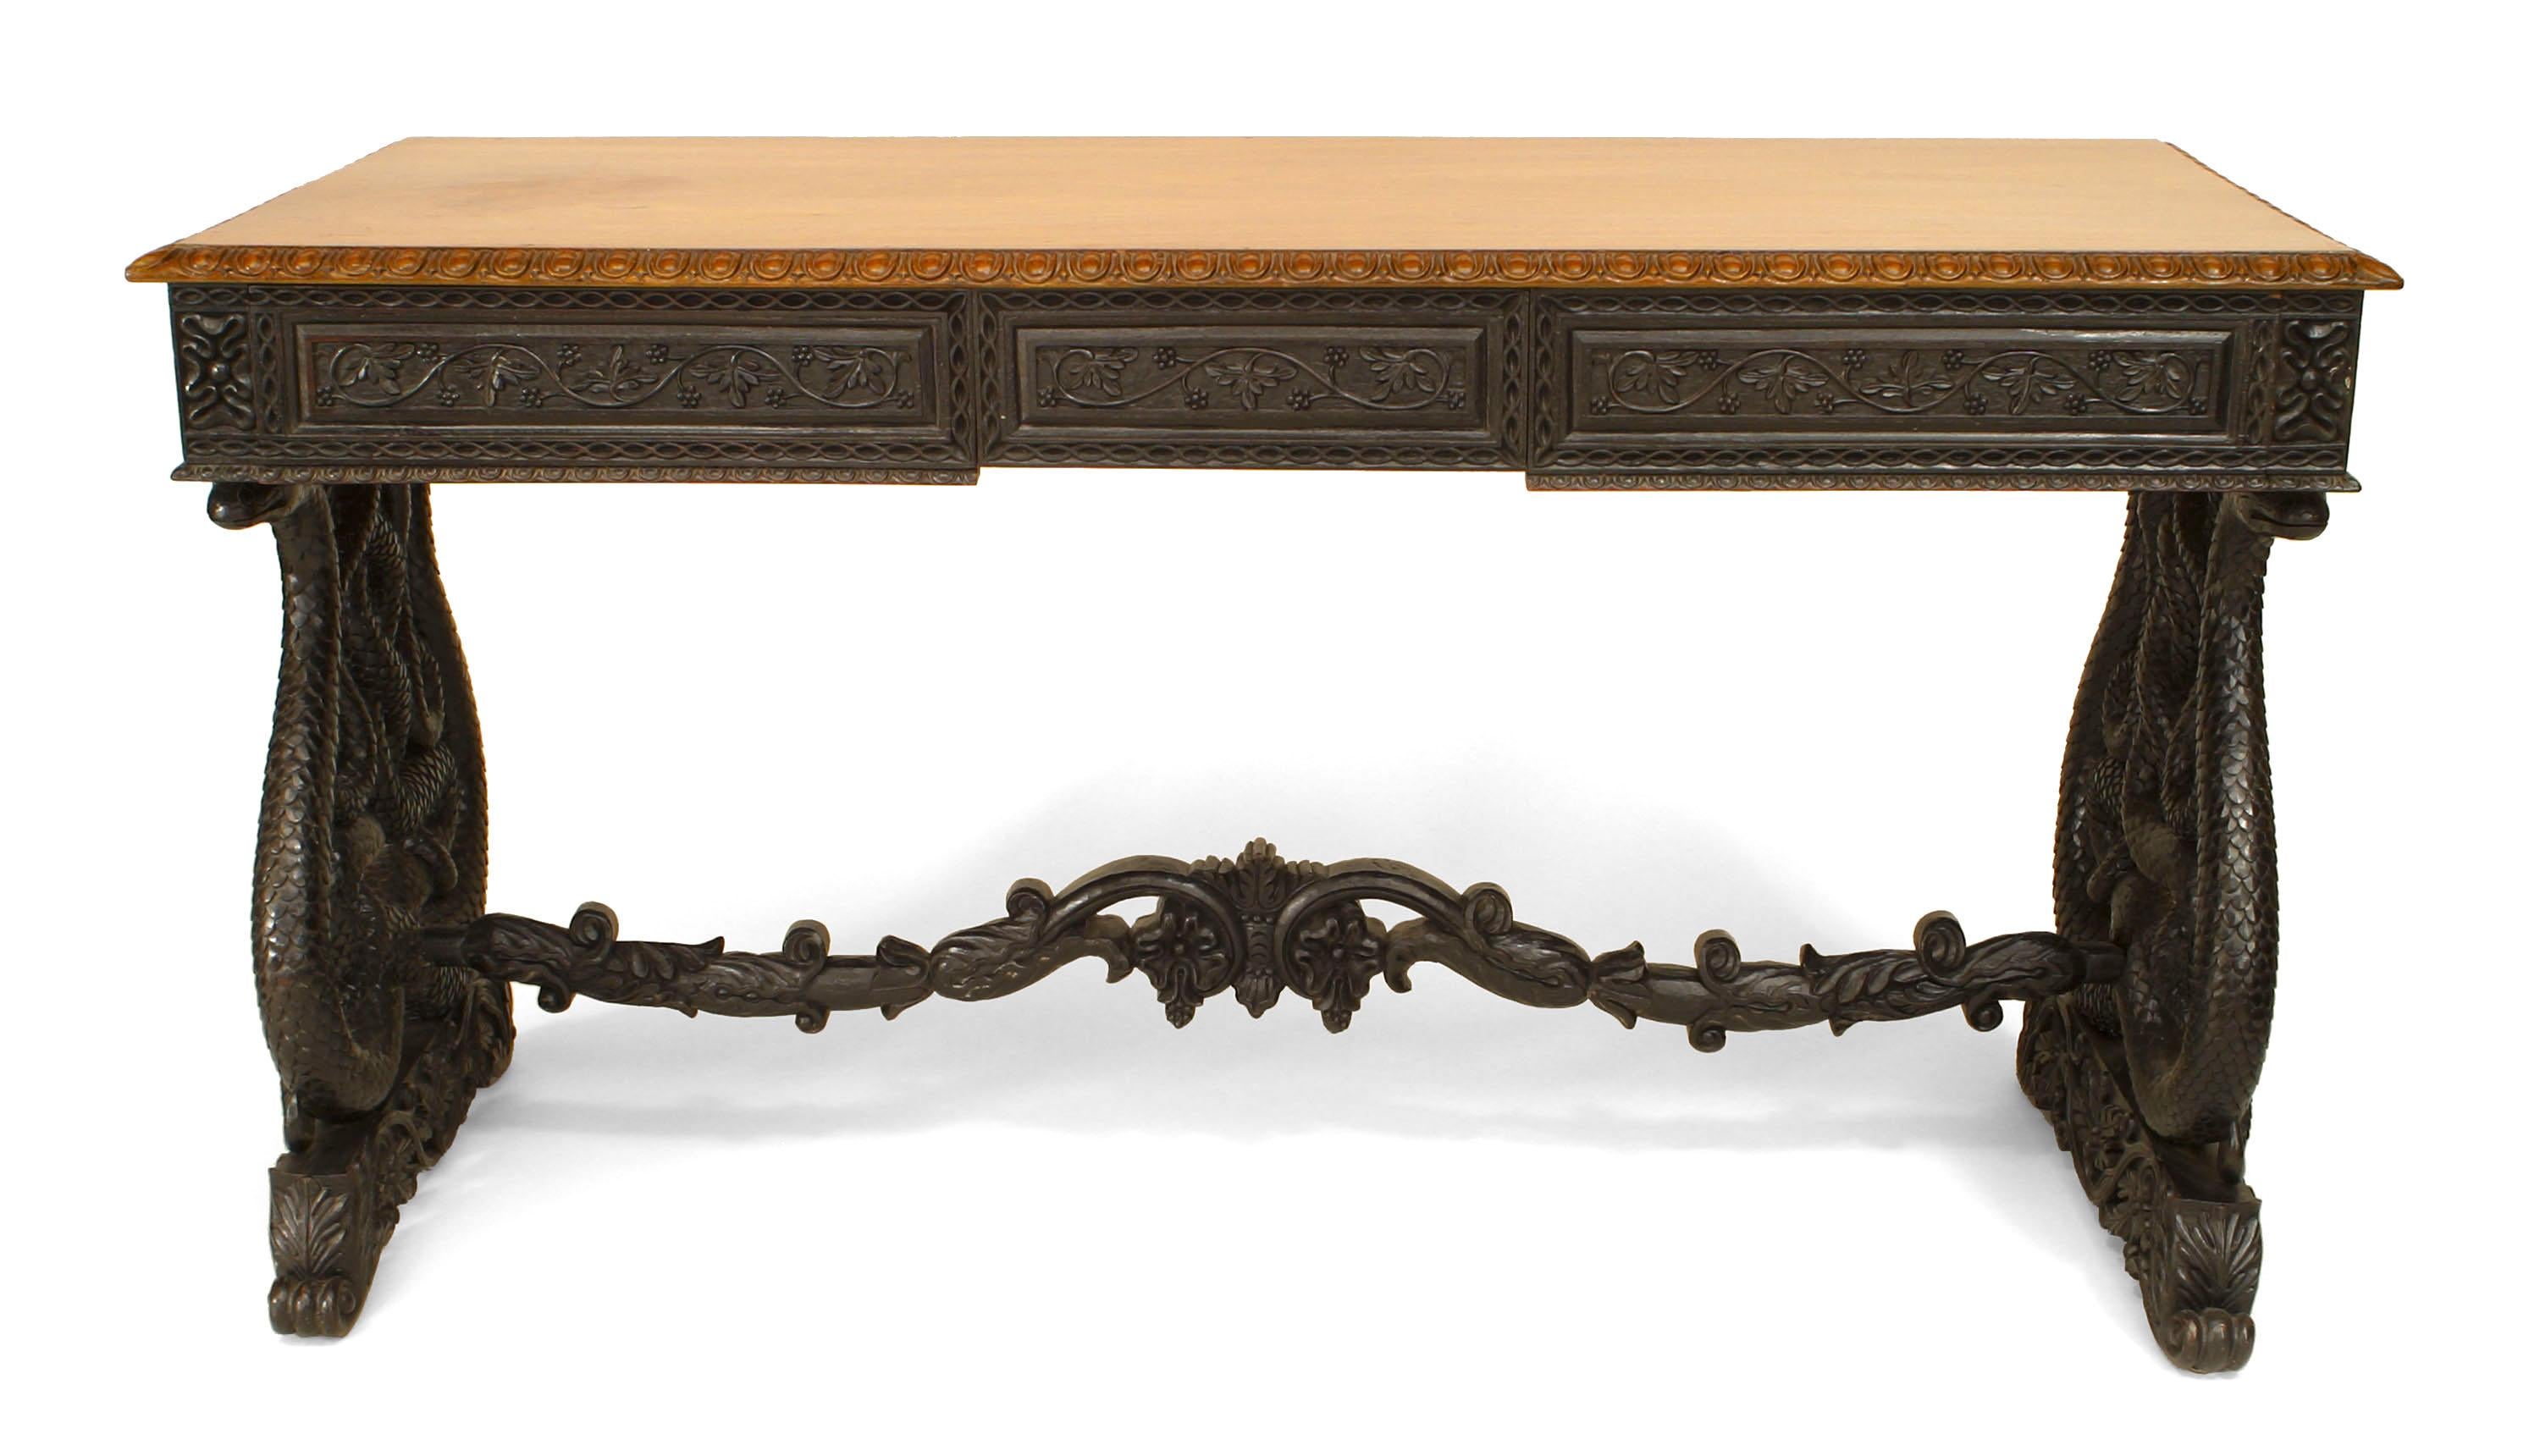 Mid-19th century English Anglo-Indian ebonized rosewood and padouk writing table with 3 frieze drawers over entwined serpent trestle legs joined by a stretcher. (possibly Ceylonese).